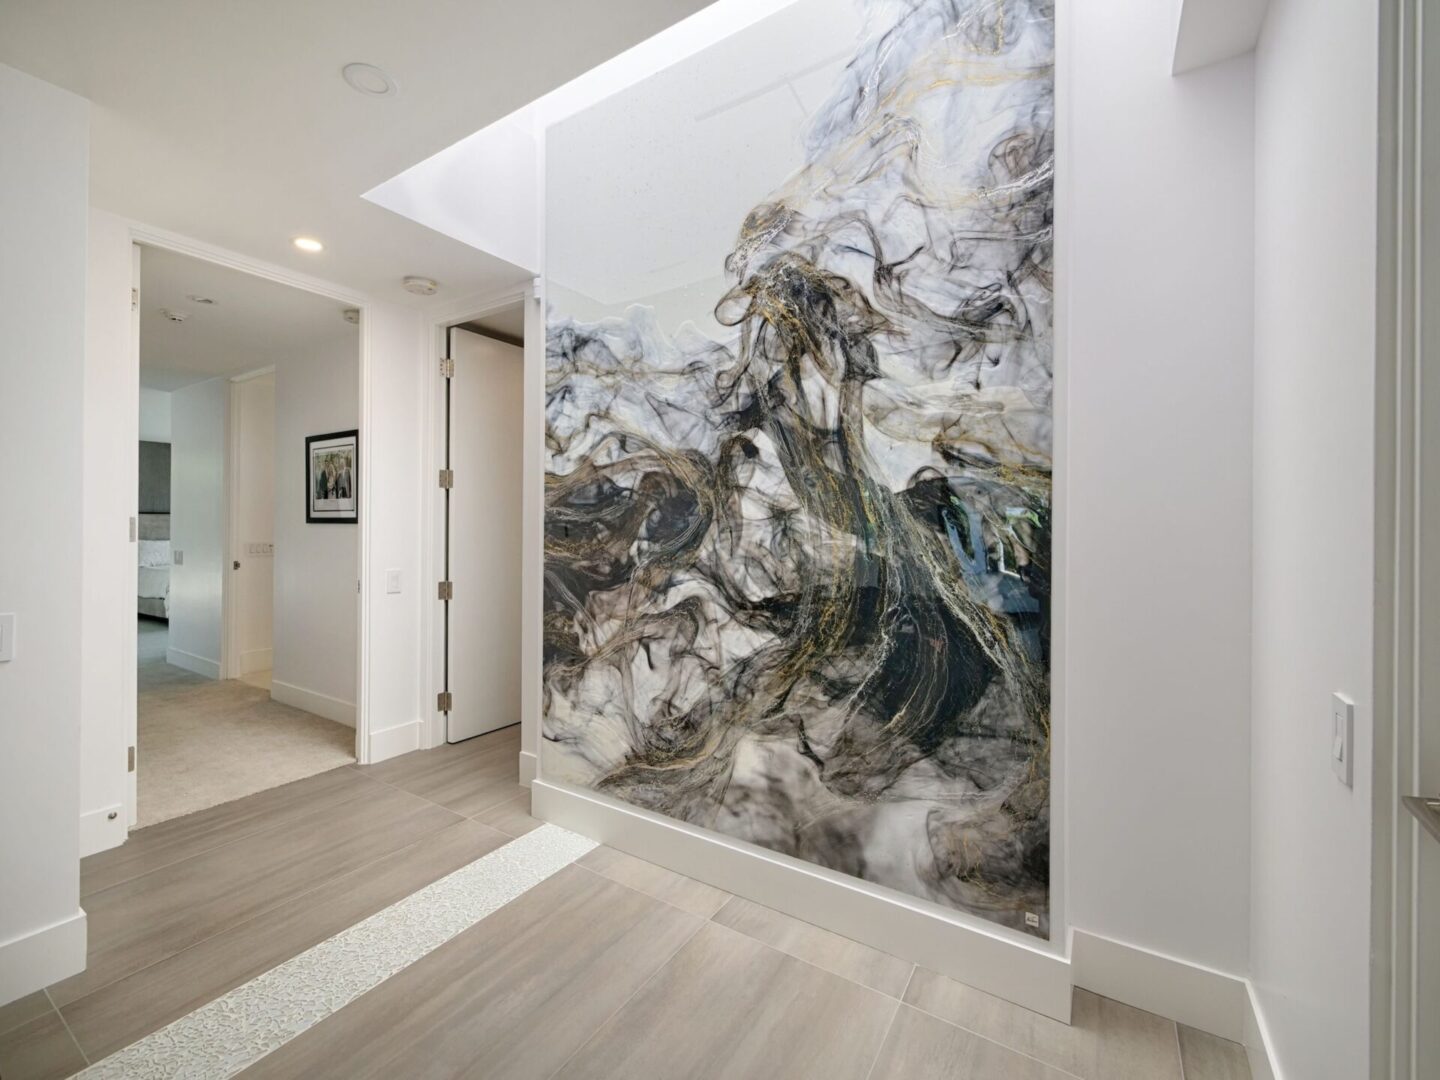 A large painting of a dragon on the wall